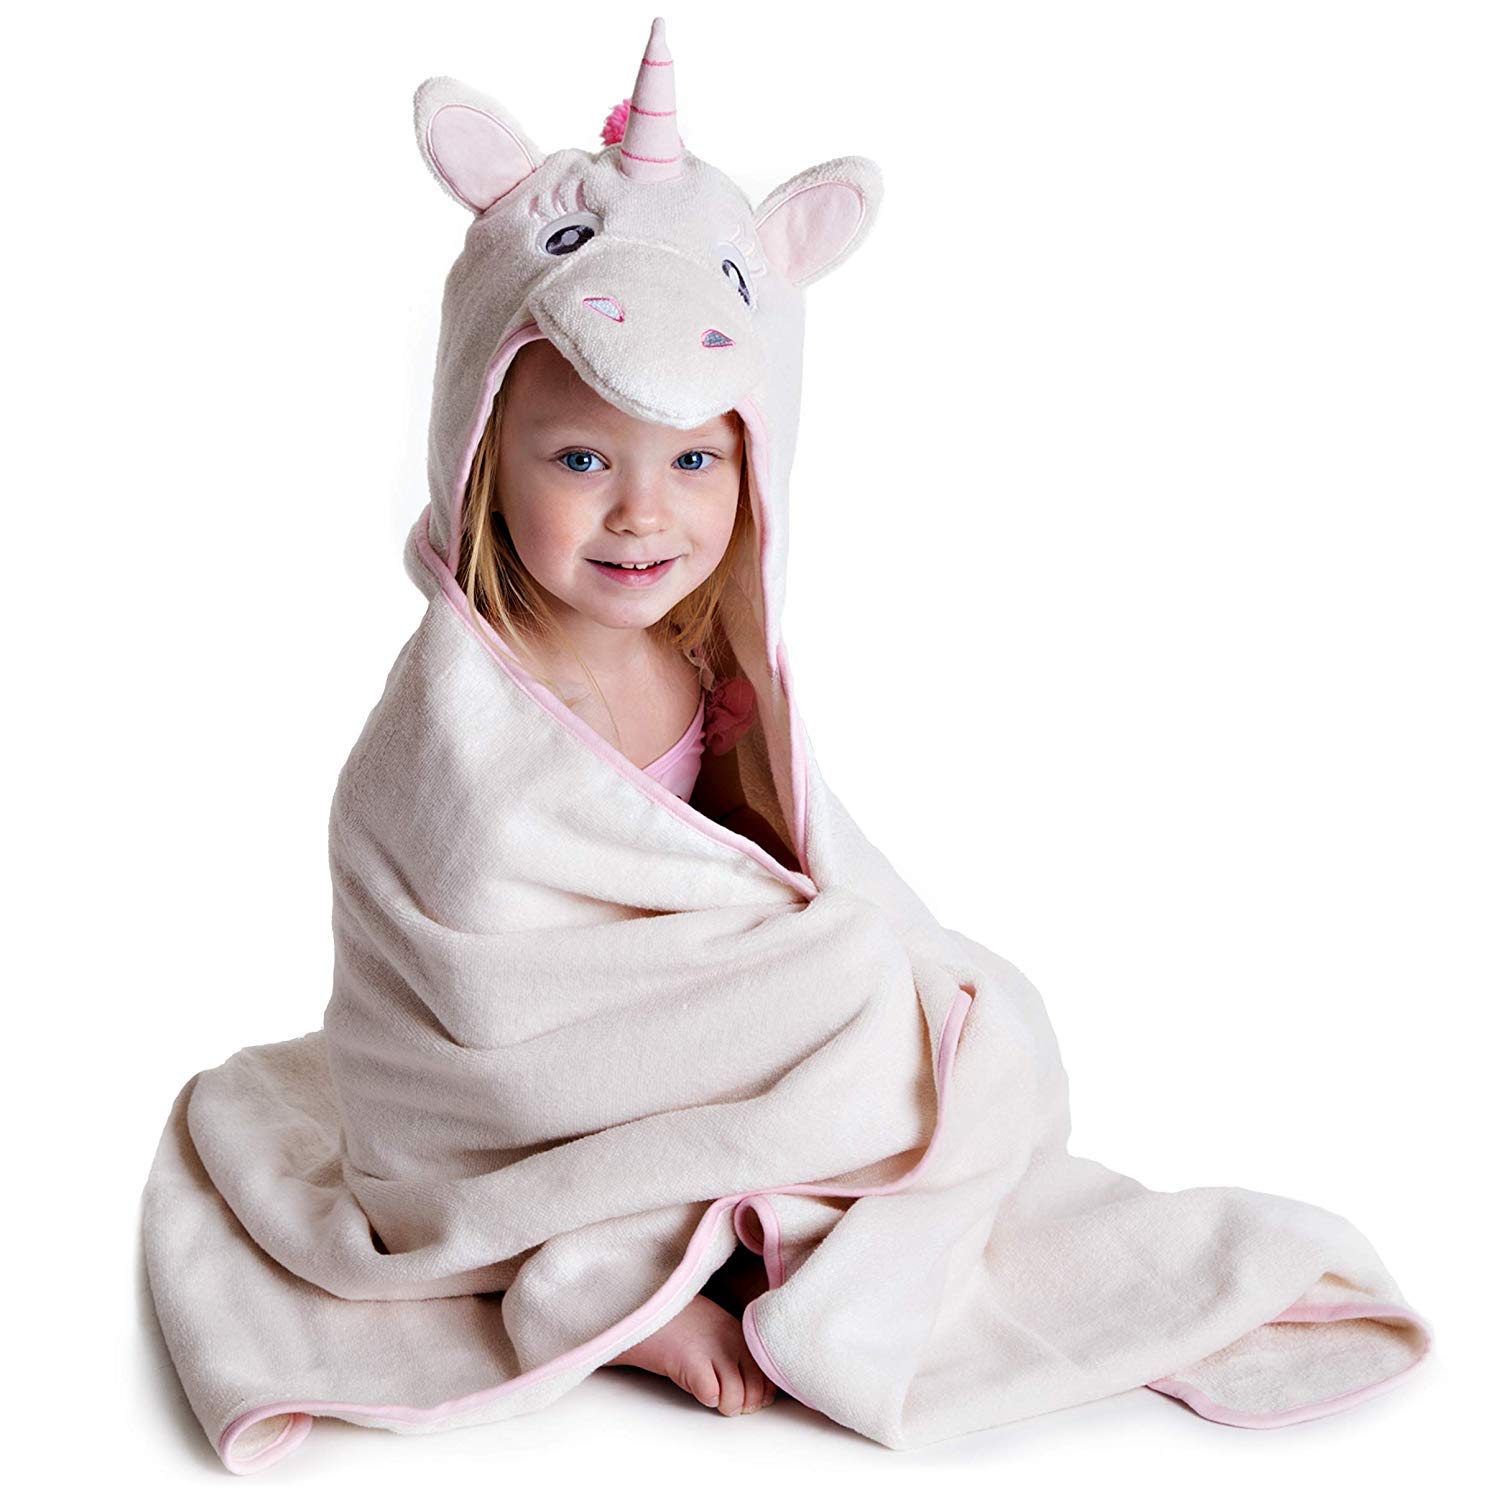 Hooded Towels for Kids: The Ultimate Bath Time Companion